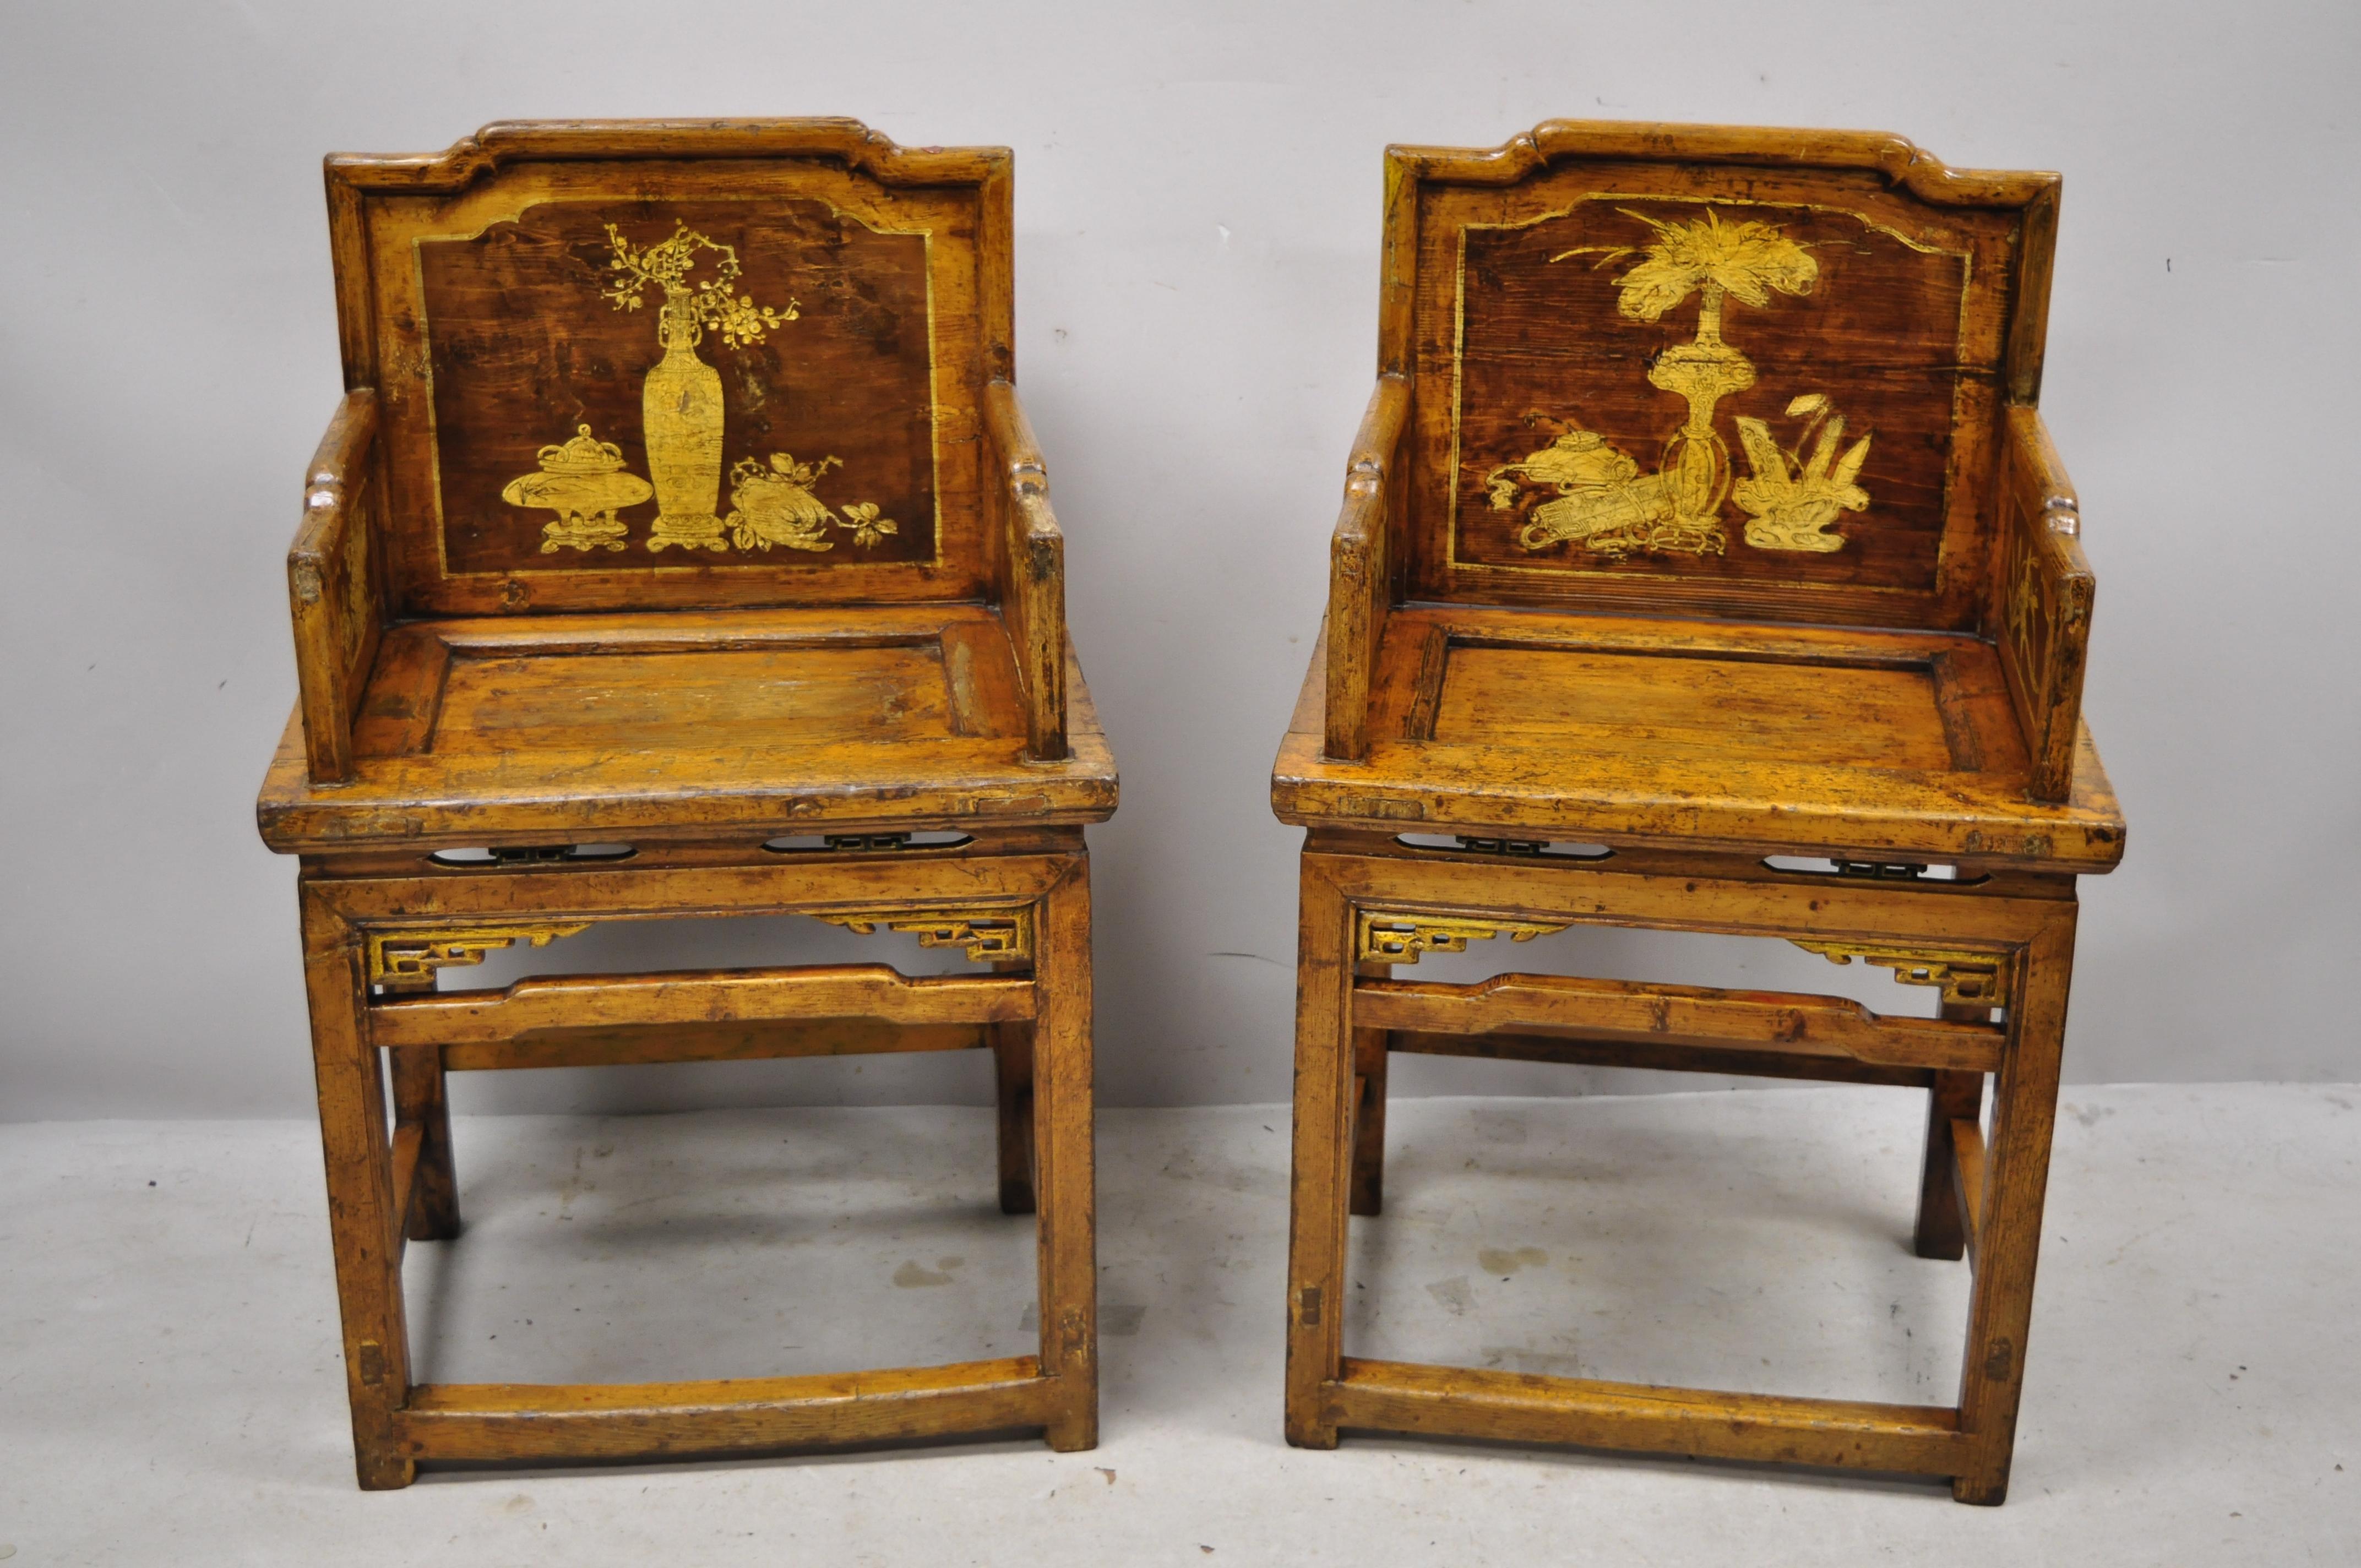 Vintage Chinese Yoke back carved wood floral decorated throne lounge armchairs, a pair. Item features paint decorated details, remarkable distressed/patina finish, very nice vintage pair, great style and form, circa mid-late 20th century.